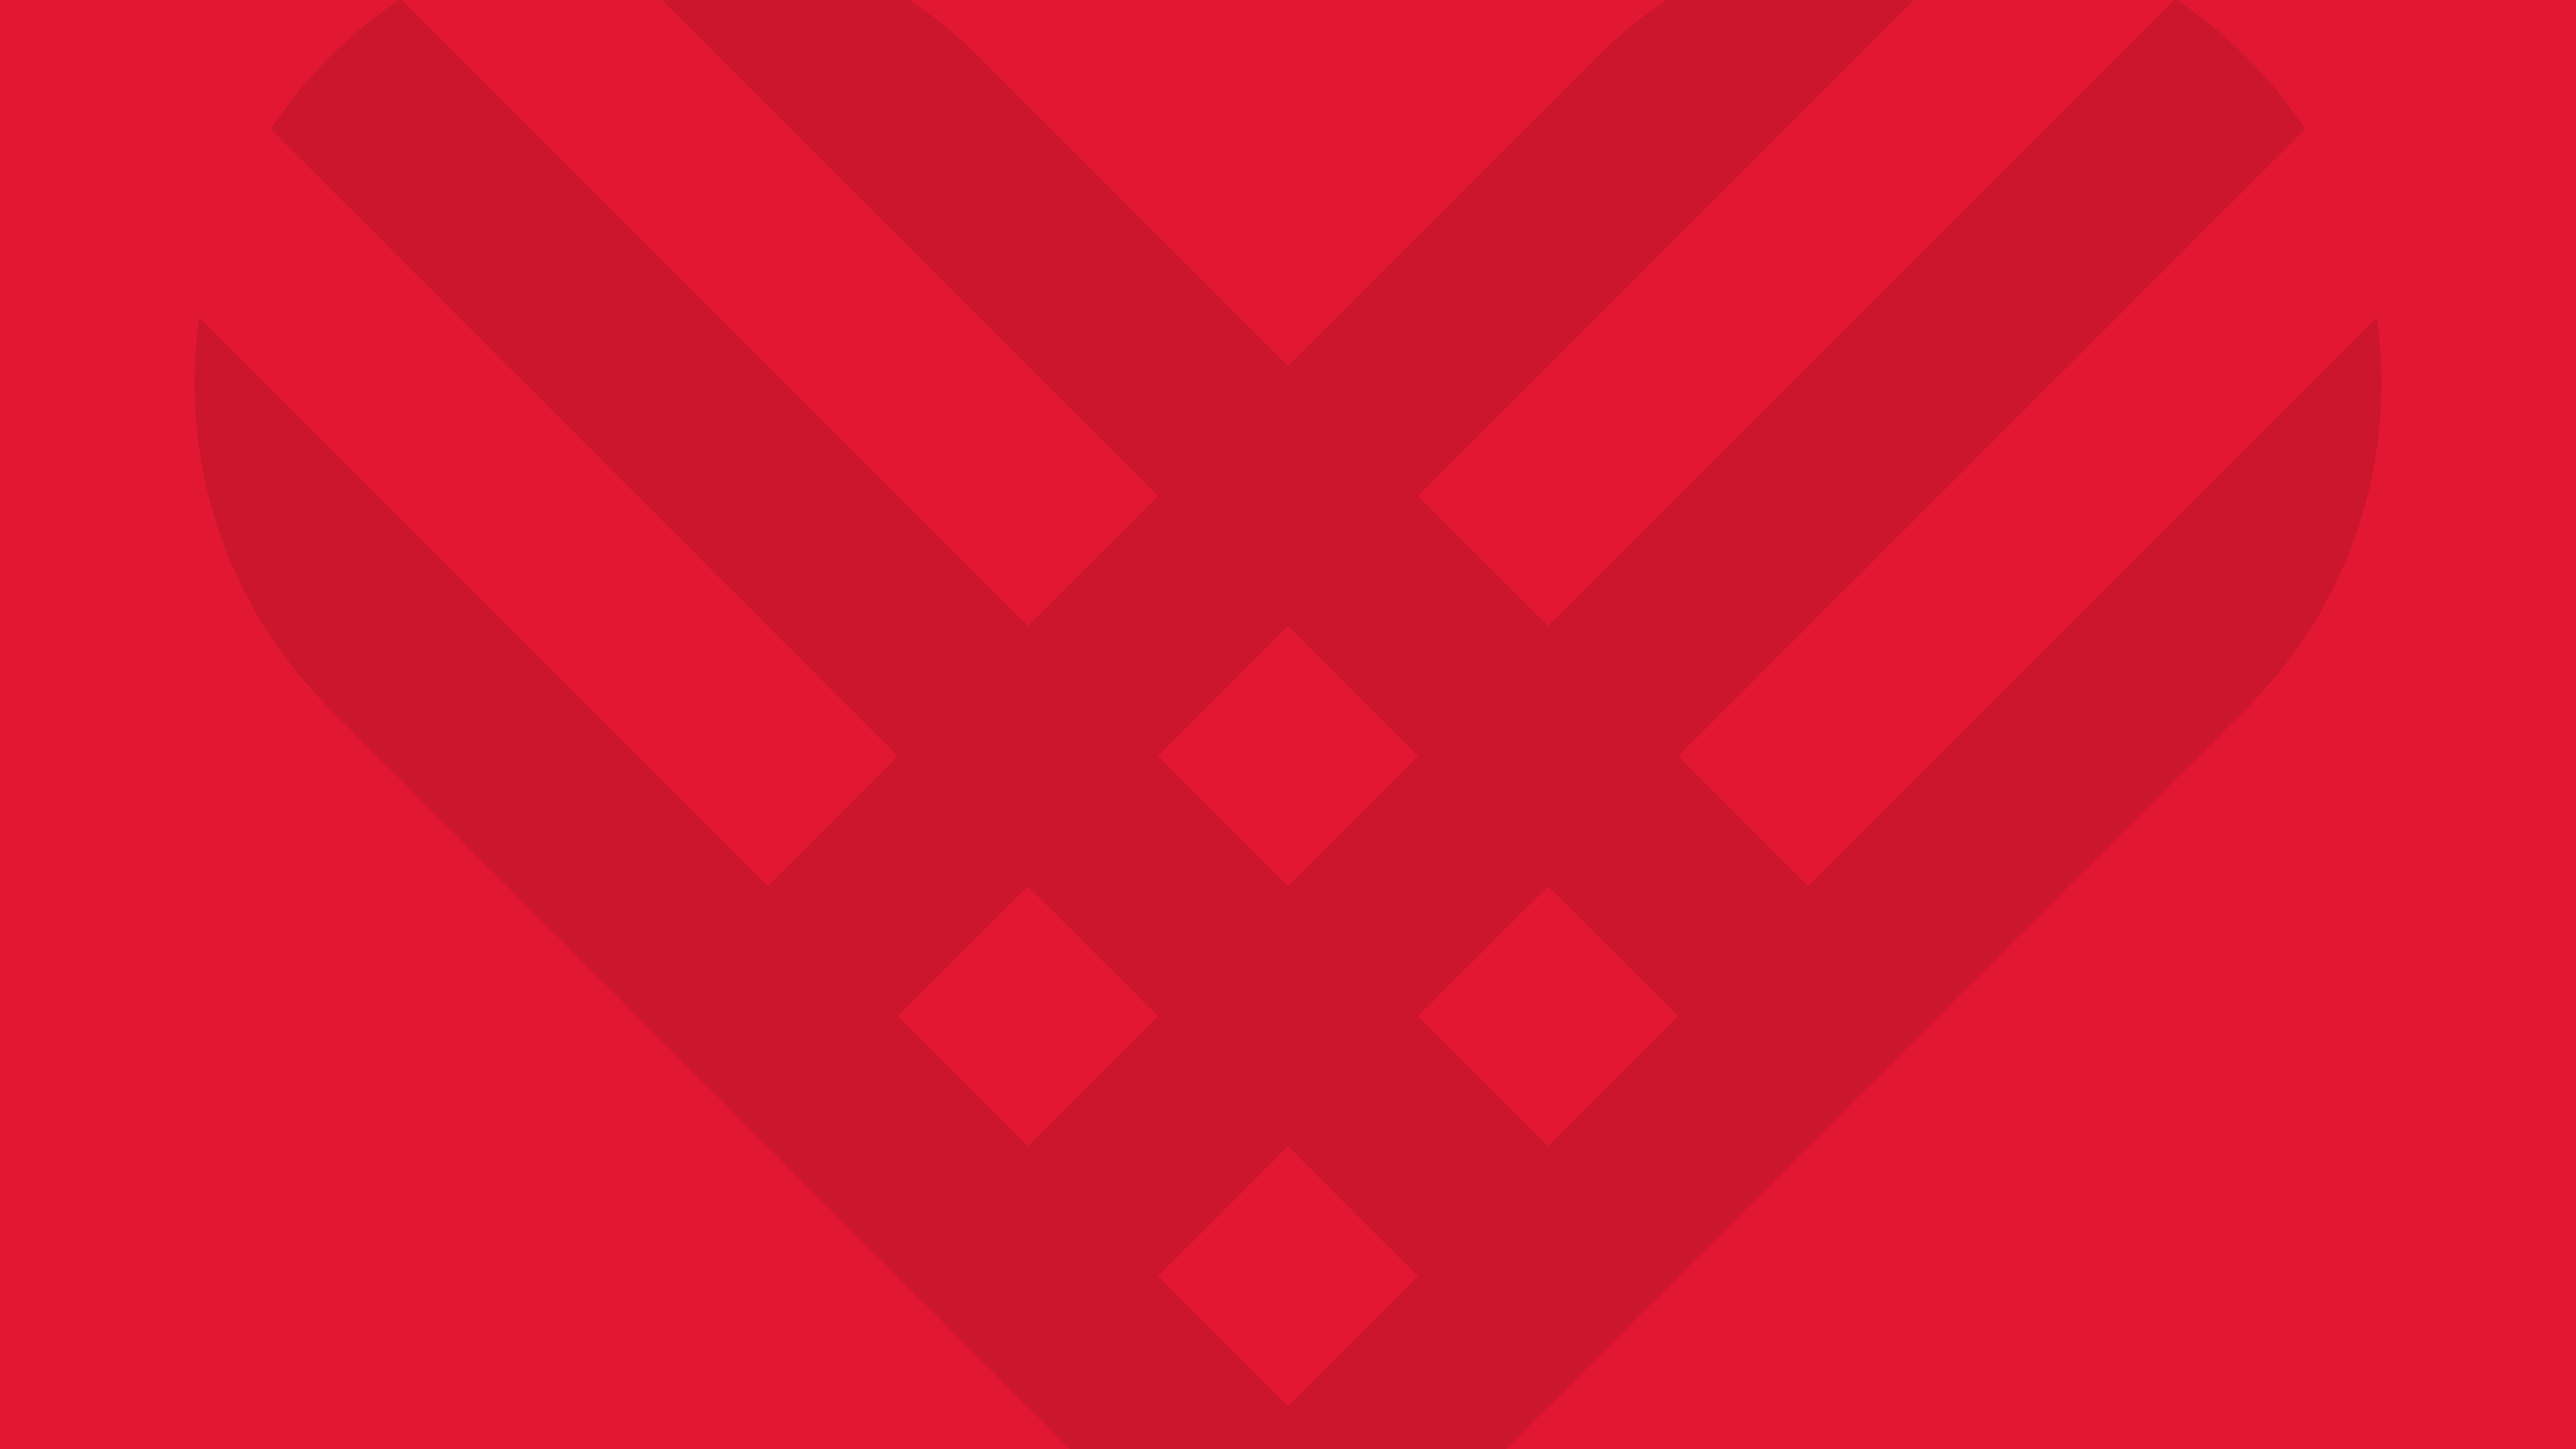 Giving Tuesday heart icon against a red background